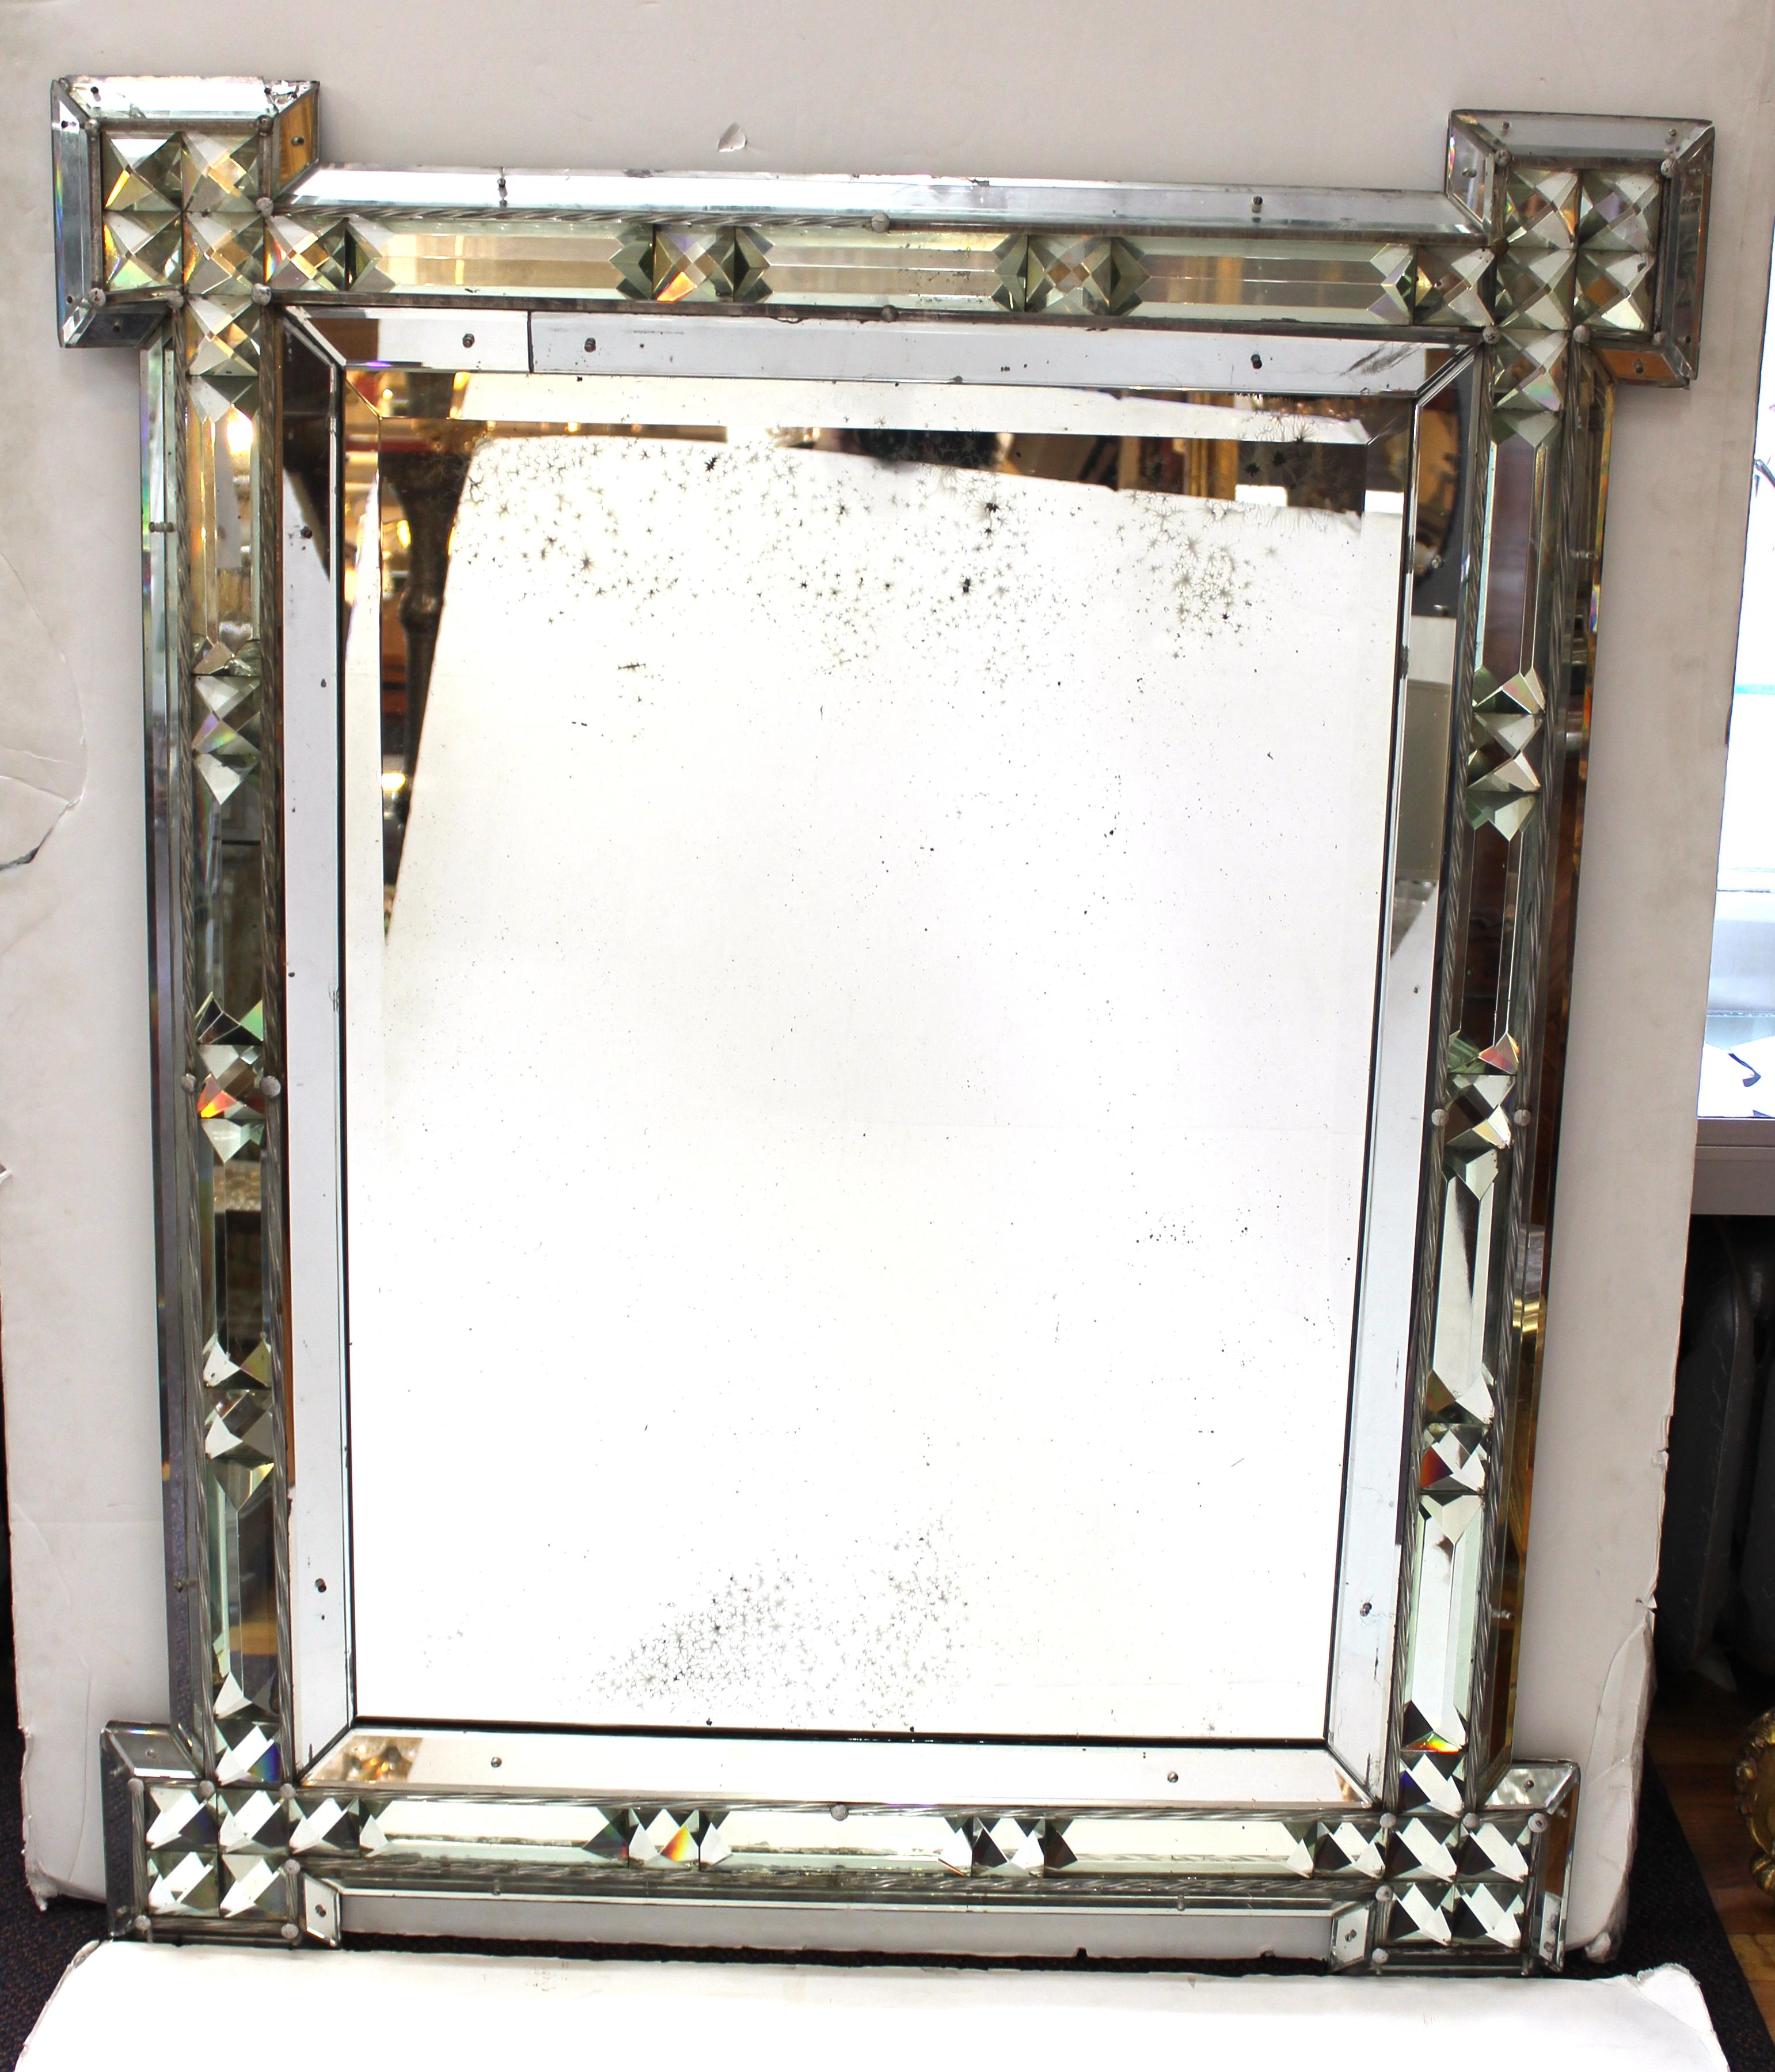 Hollywood Regency mirror with a decorative border inset with cut-glass prisms and twisted blown glass baguettes. The piece was made in Italy in the mid-20th century and has wear to the mirror, some replaced border elements and tarnish. Overall in